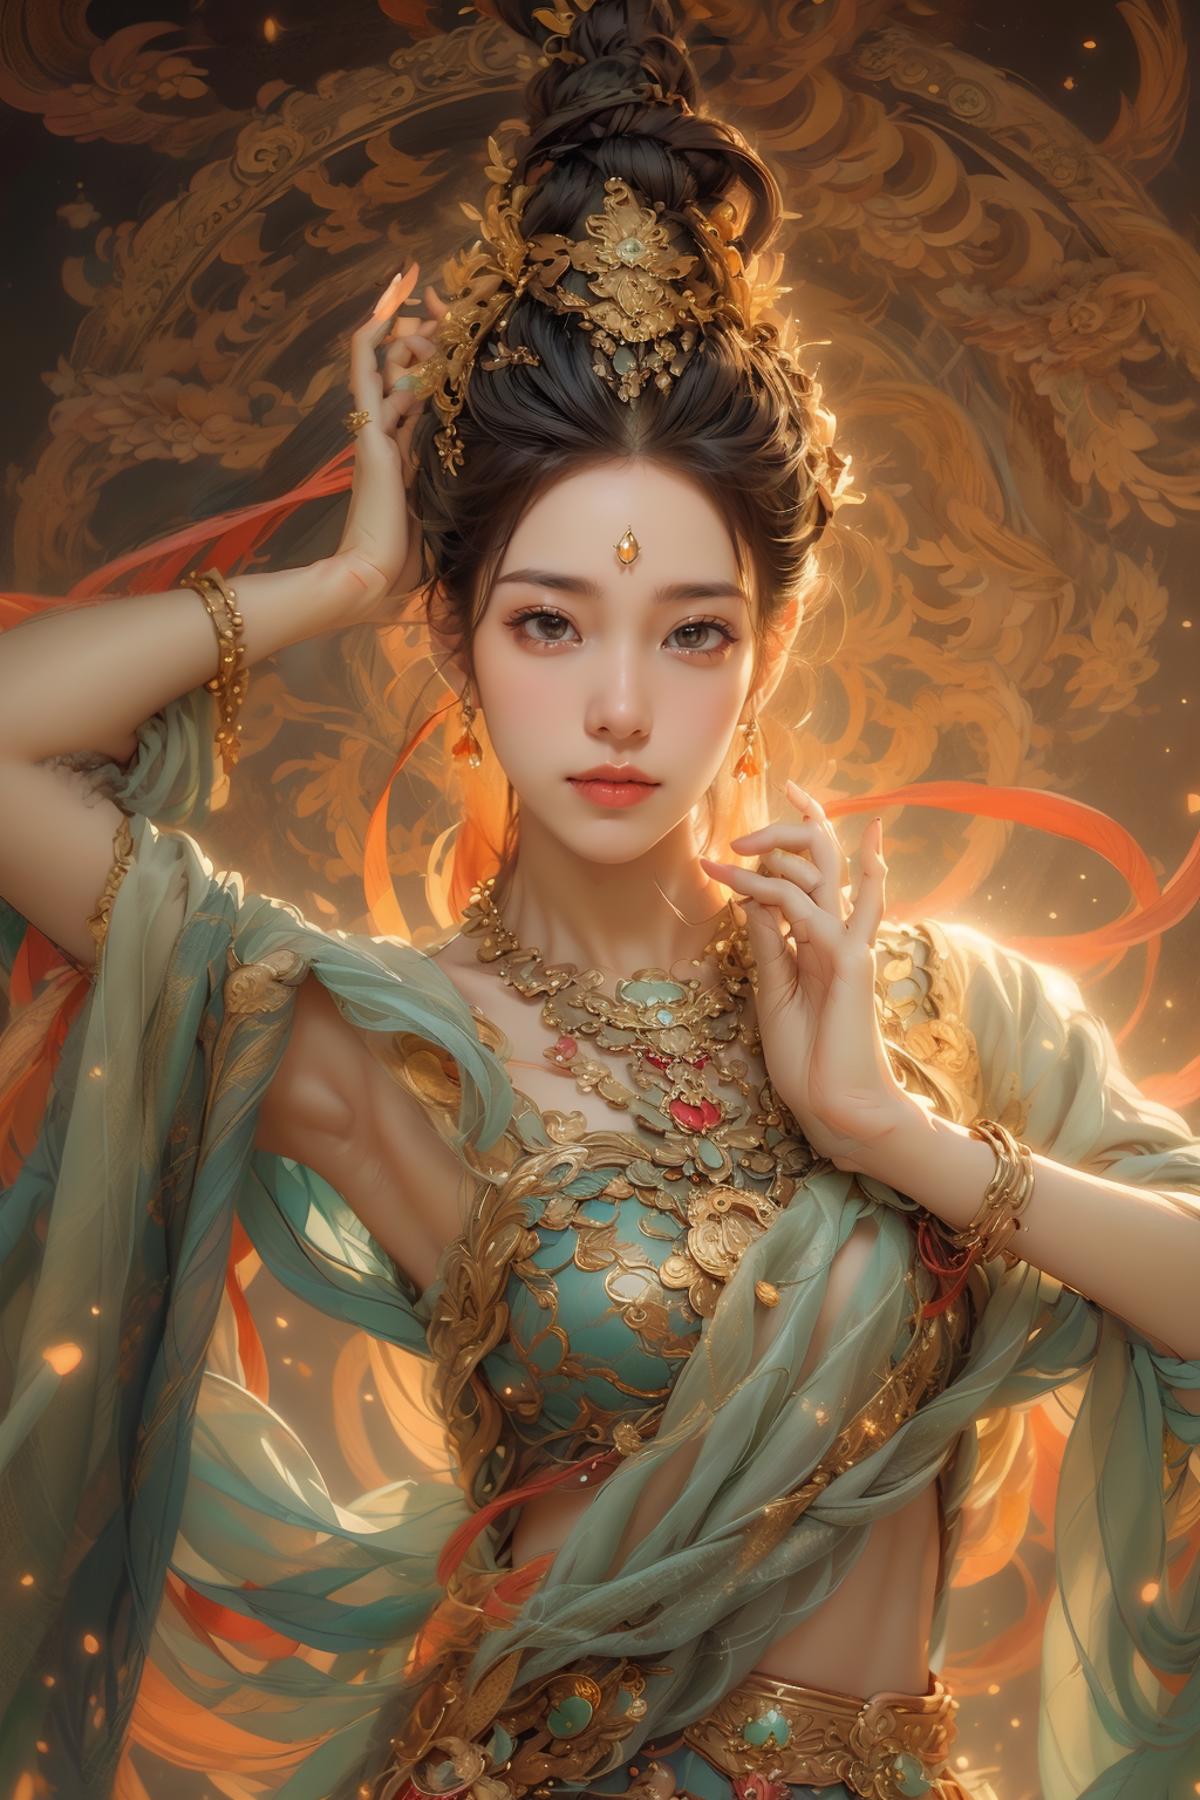 A beautiful painting of a woman in a green dress with gold jewelry and a gold crown on her head.